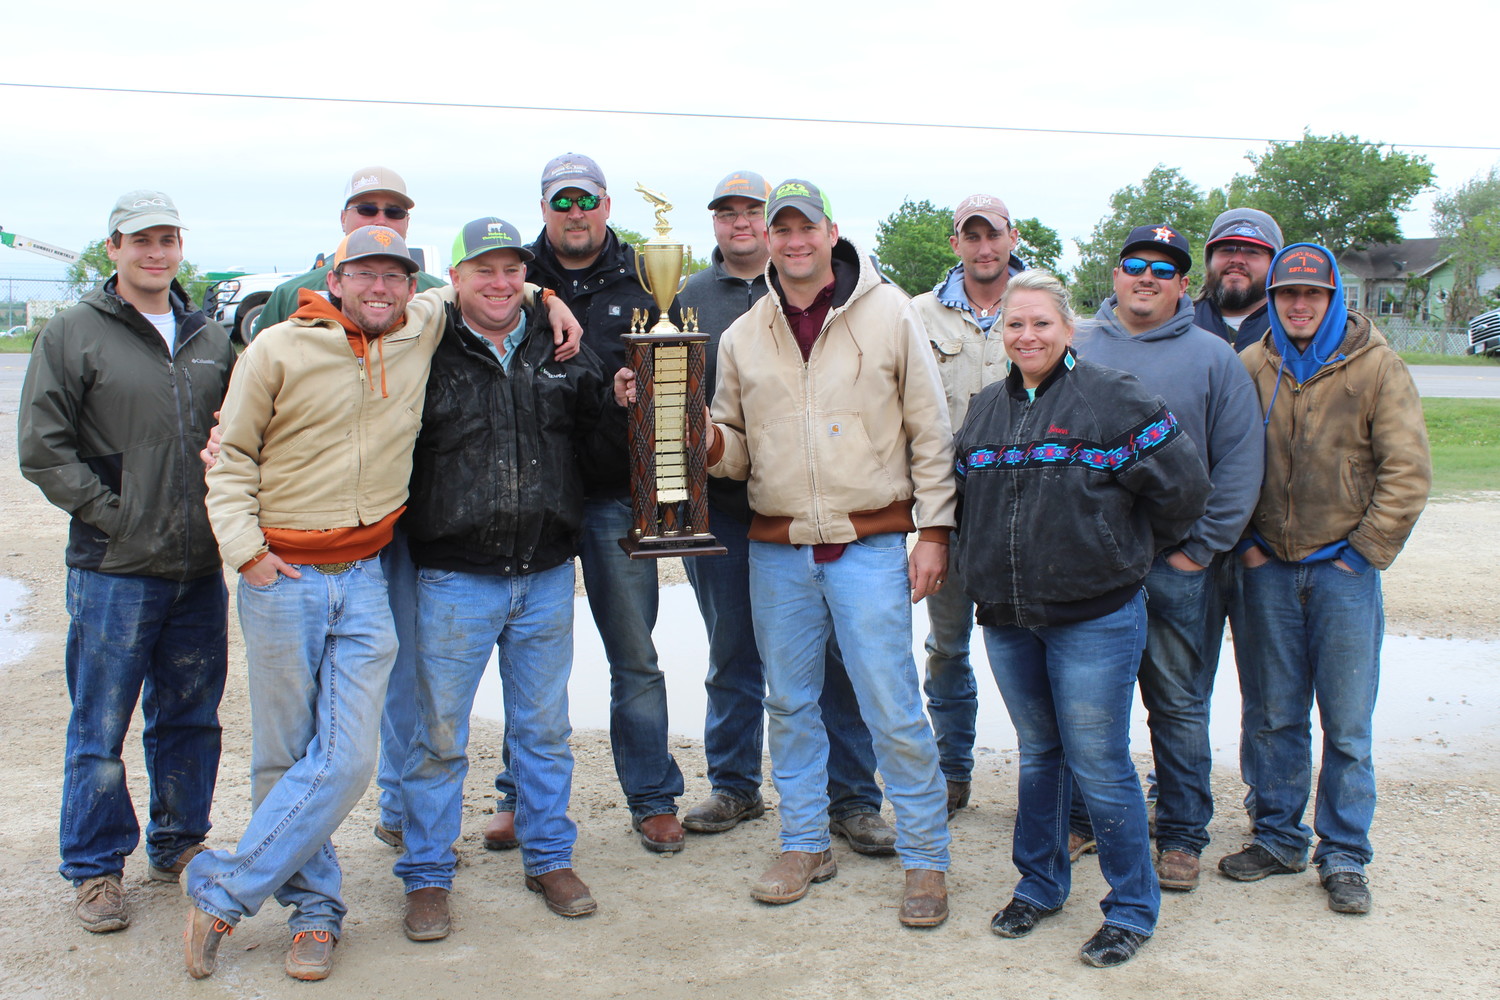 Yellow Fever (pictured) won the 14th annual Boomers catfish tournament over the weekend, capturing a total of 308 pounds of fish.